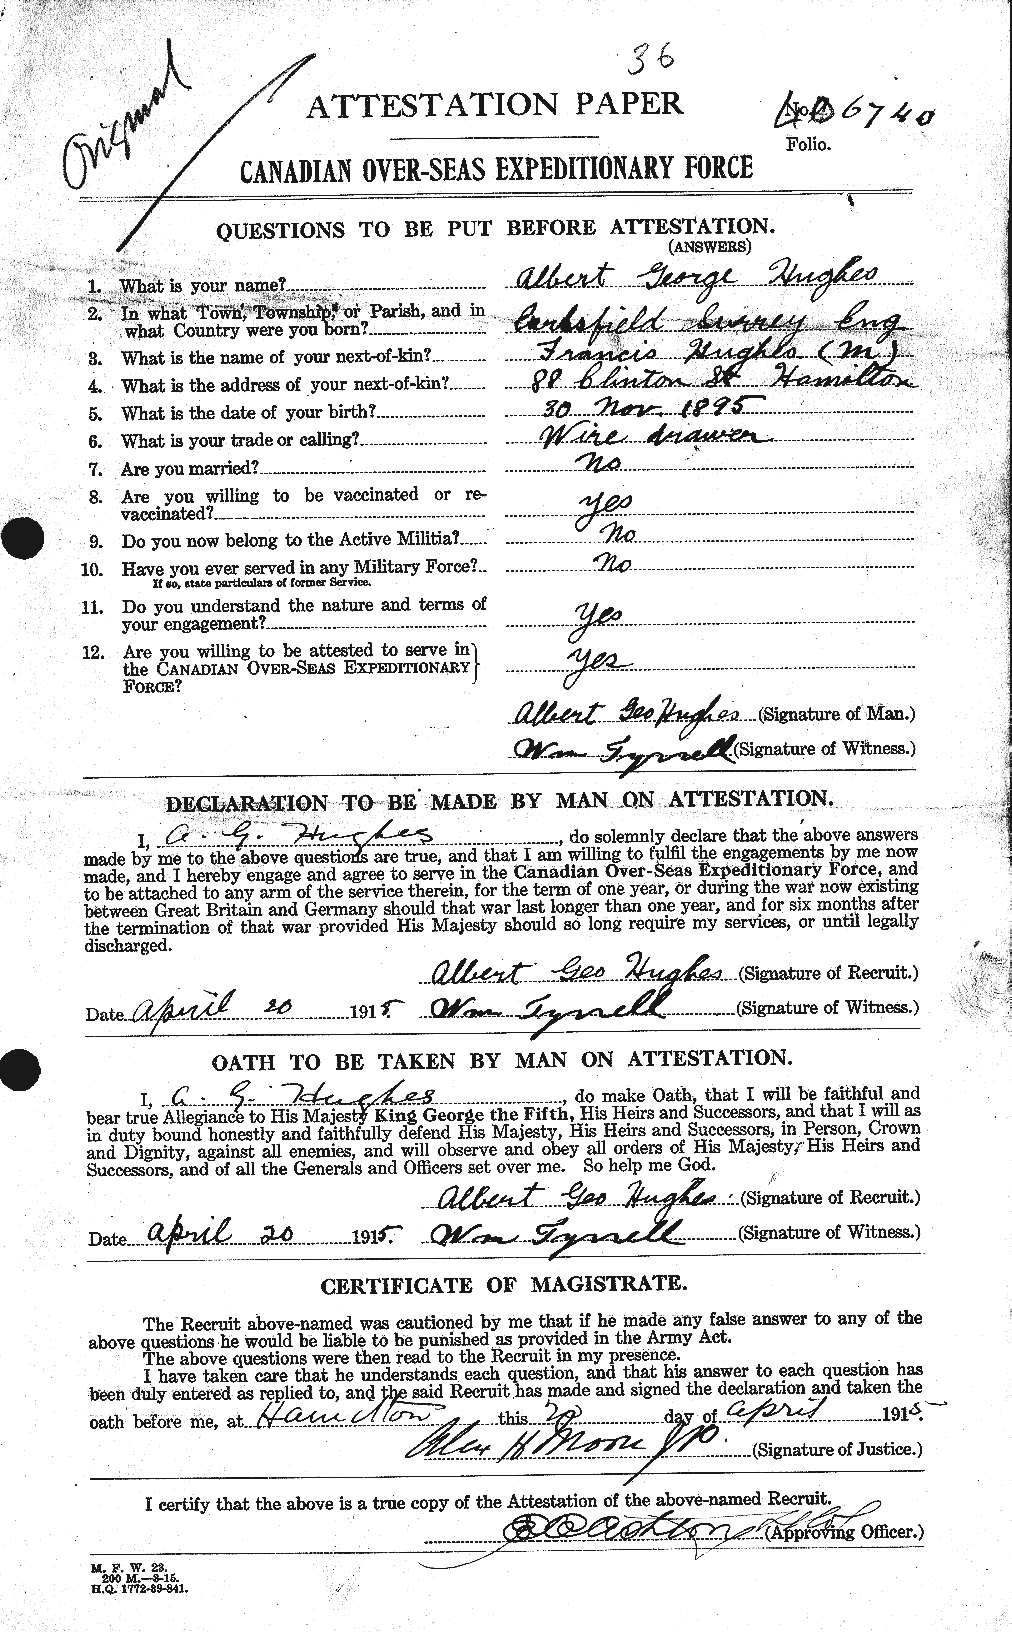 Personnel Records of the First World War - CEF 402525a